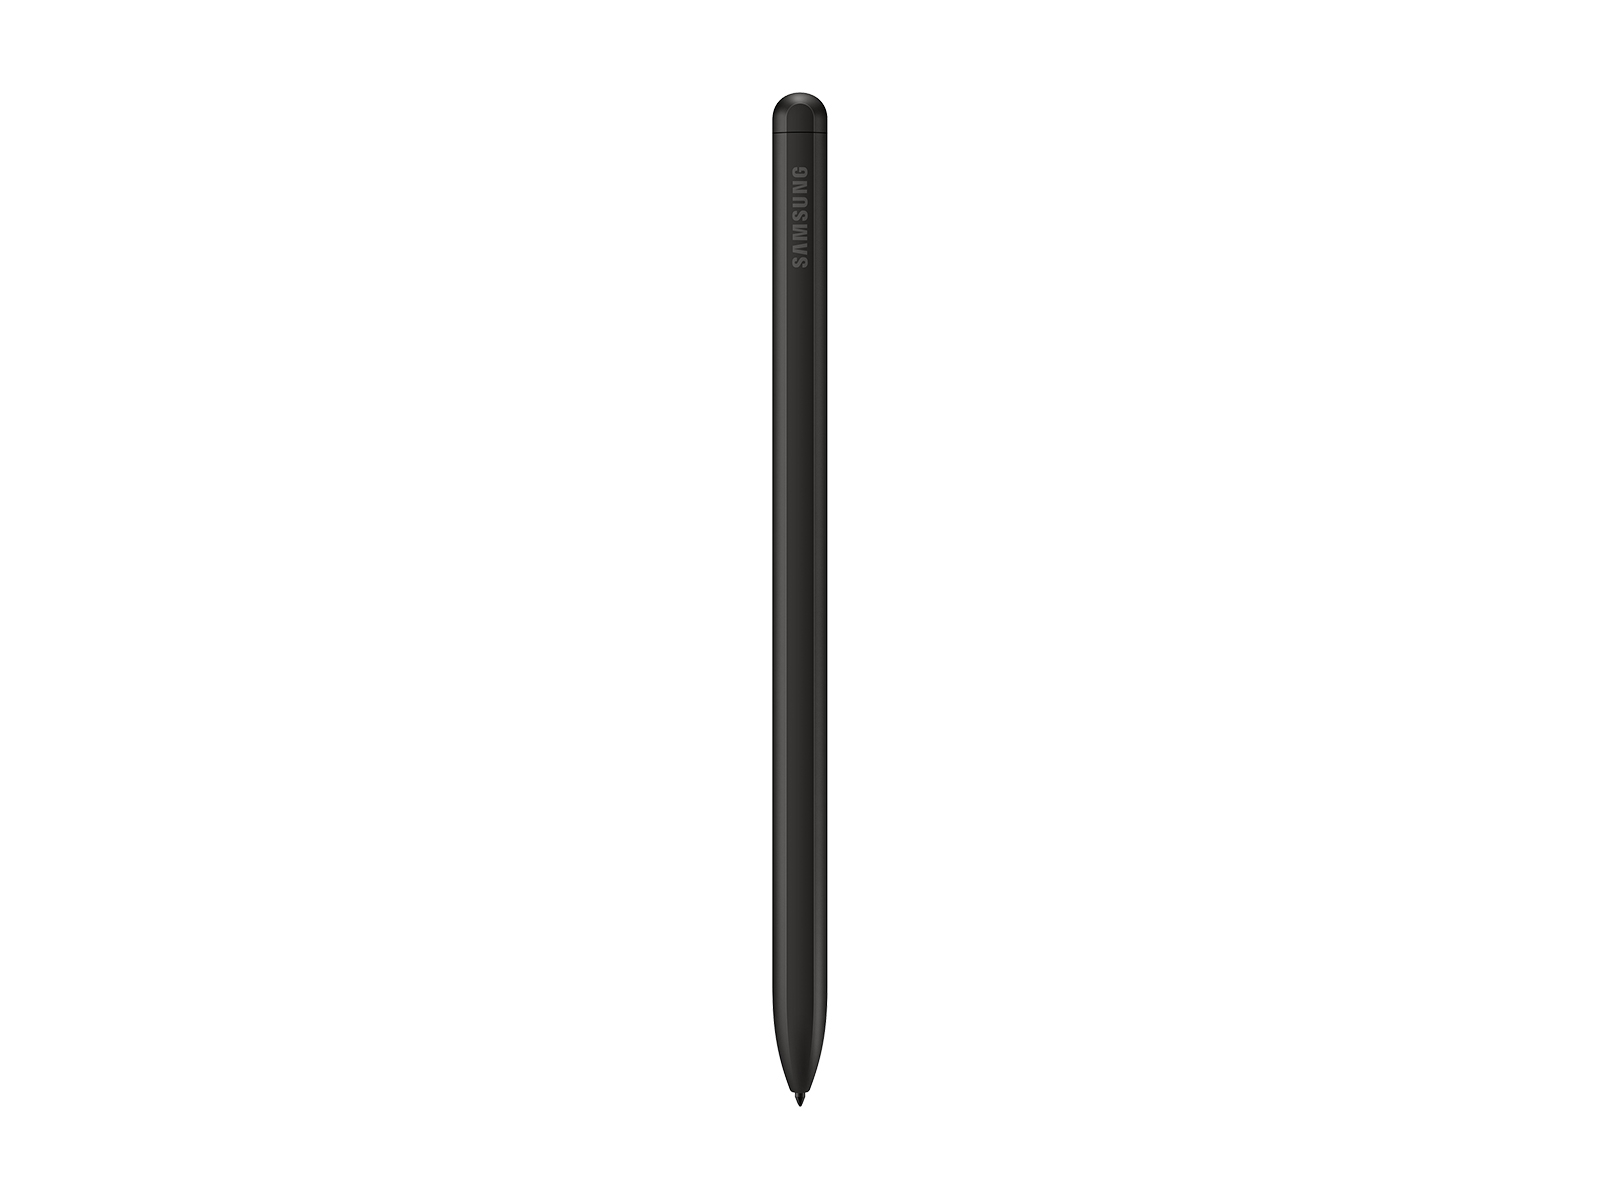 Samsung Galaxy Tab S9, S9+ and S9 Ultra launched with S Pen